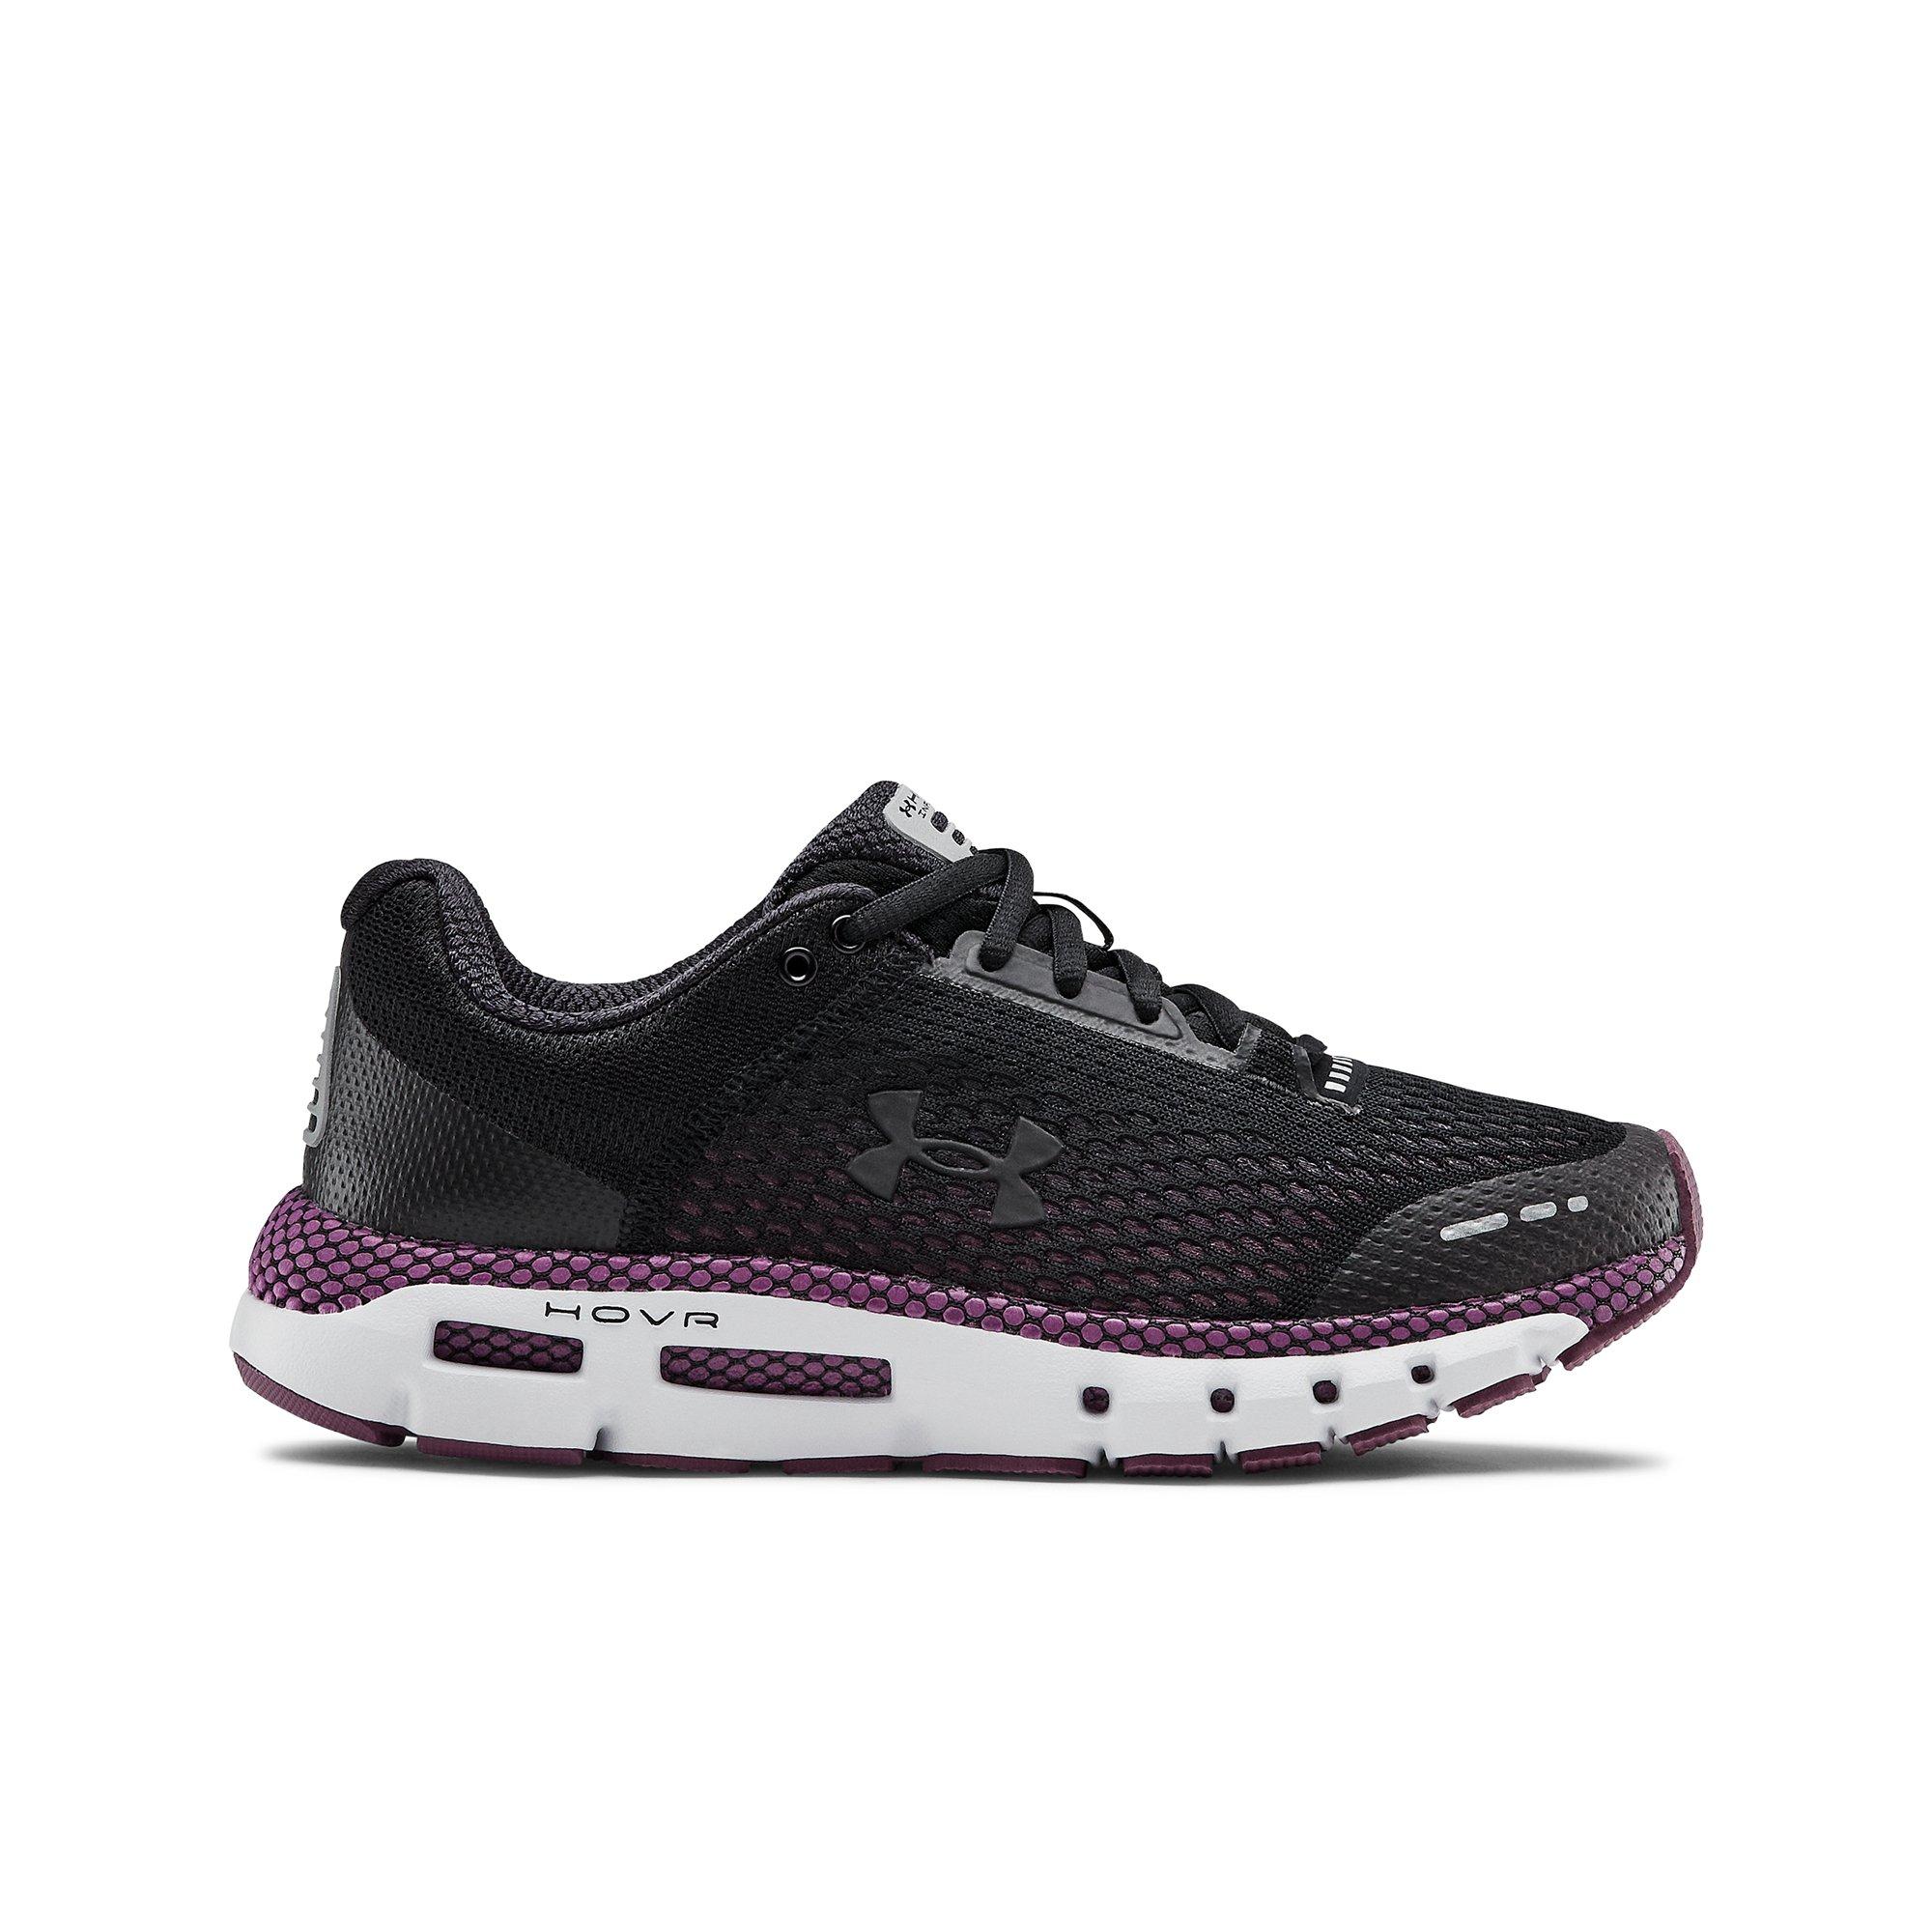 under armour women's running shoes black and white